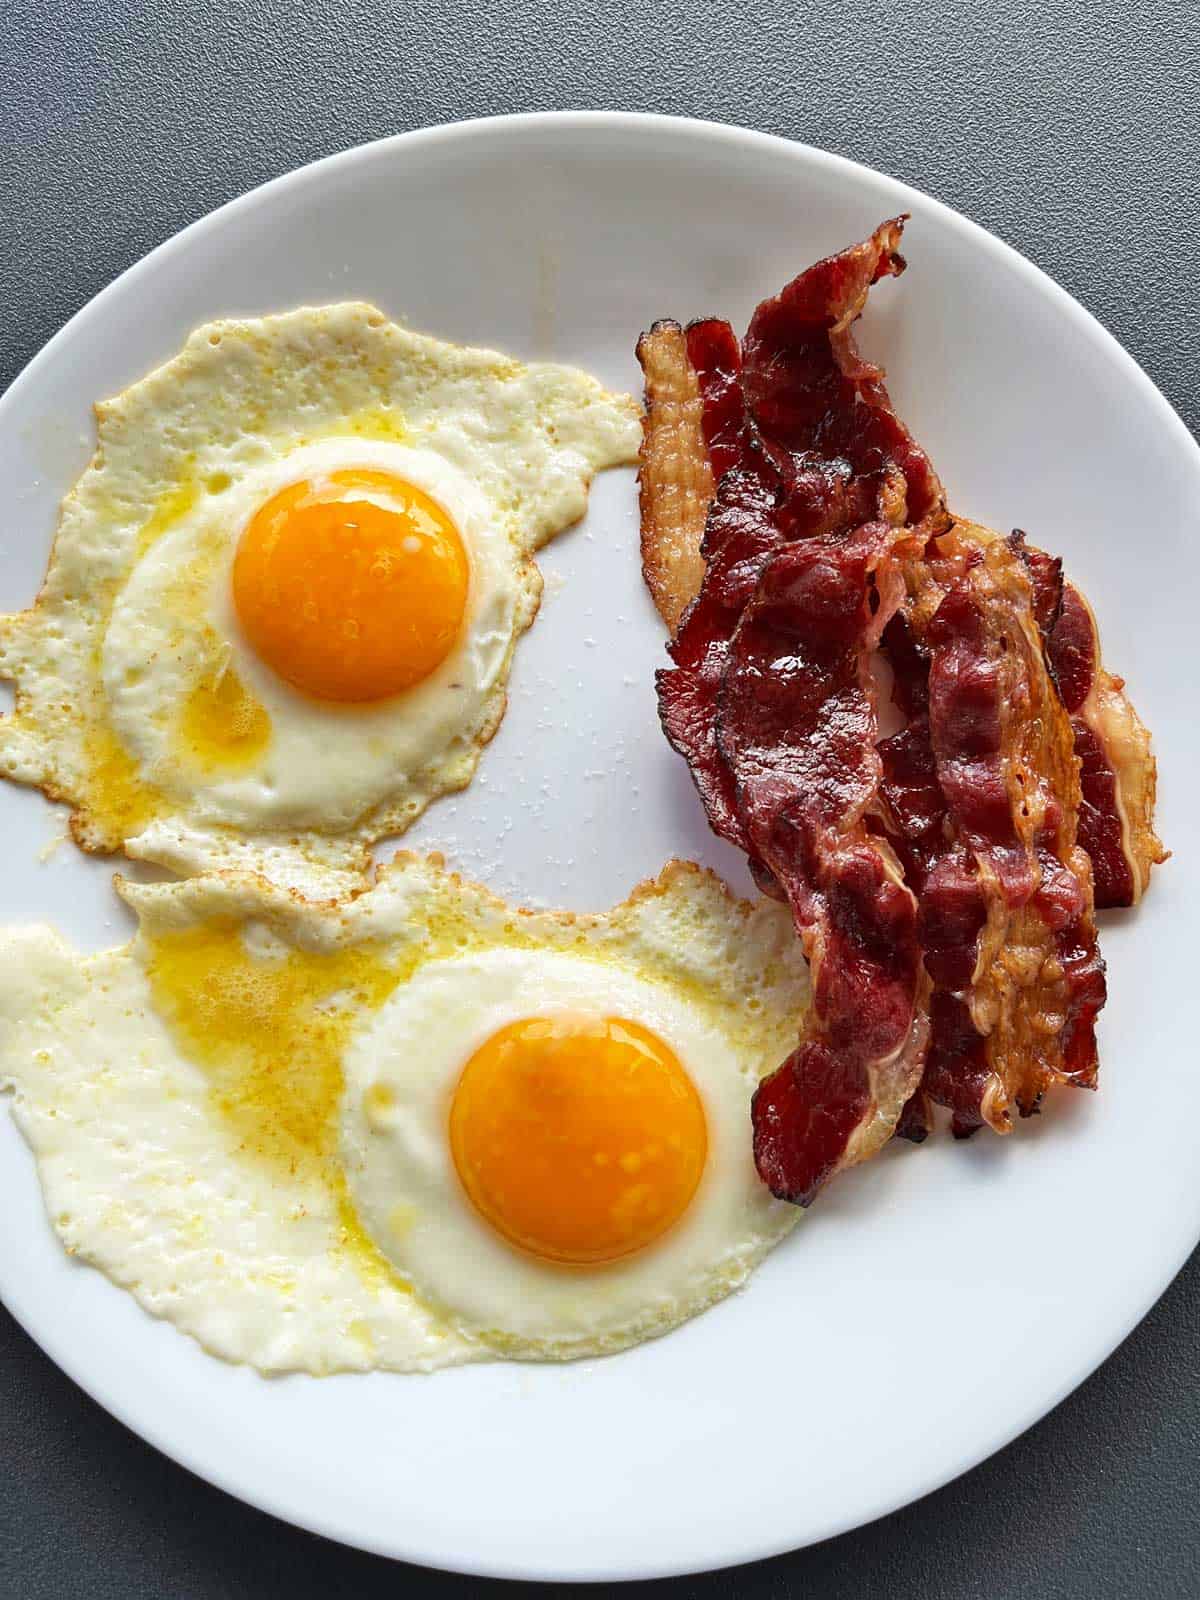 Beef bacon is served with fried eggs.